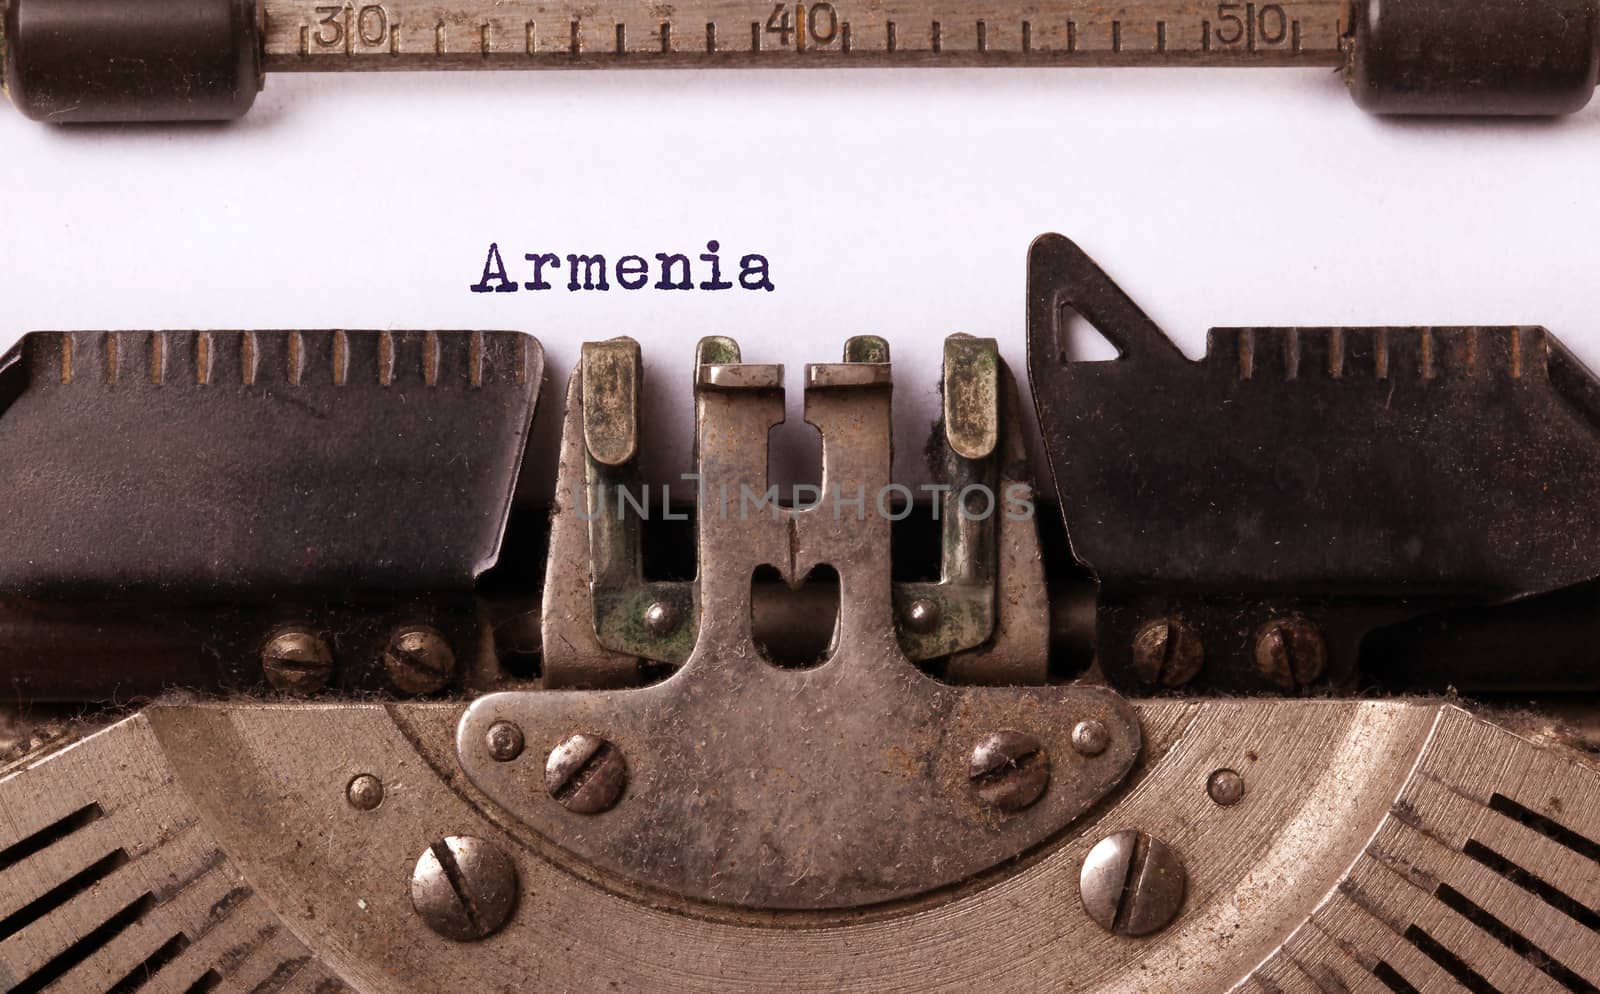 Inscription made by vinrage typewriter, country, Armenia